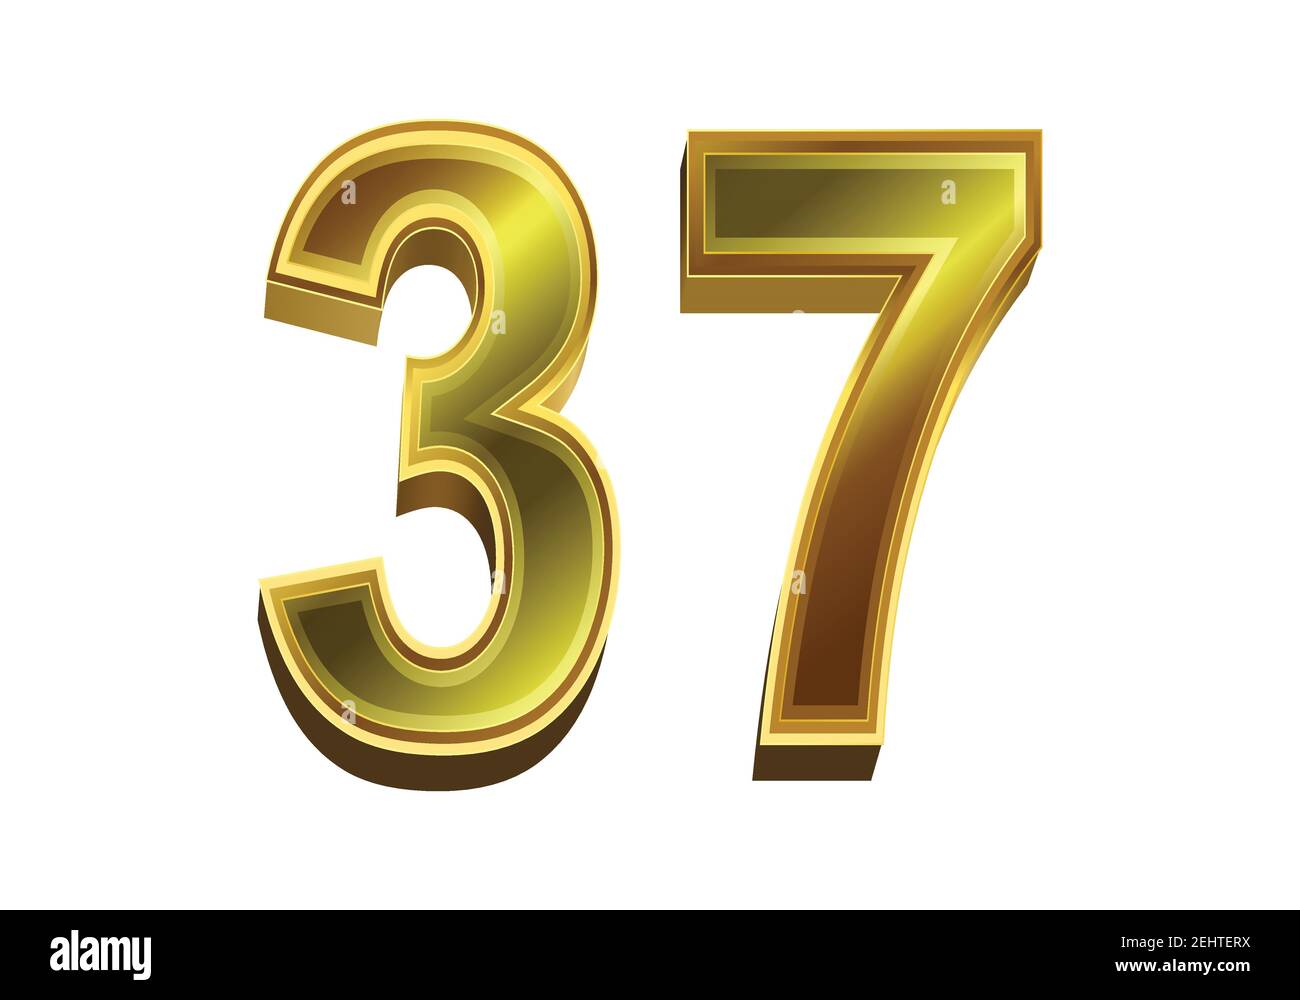 3d Golden Number 37 Isolated On White Background Stock Vector Image 